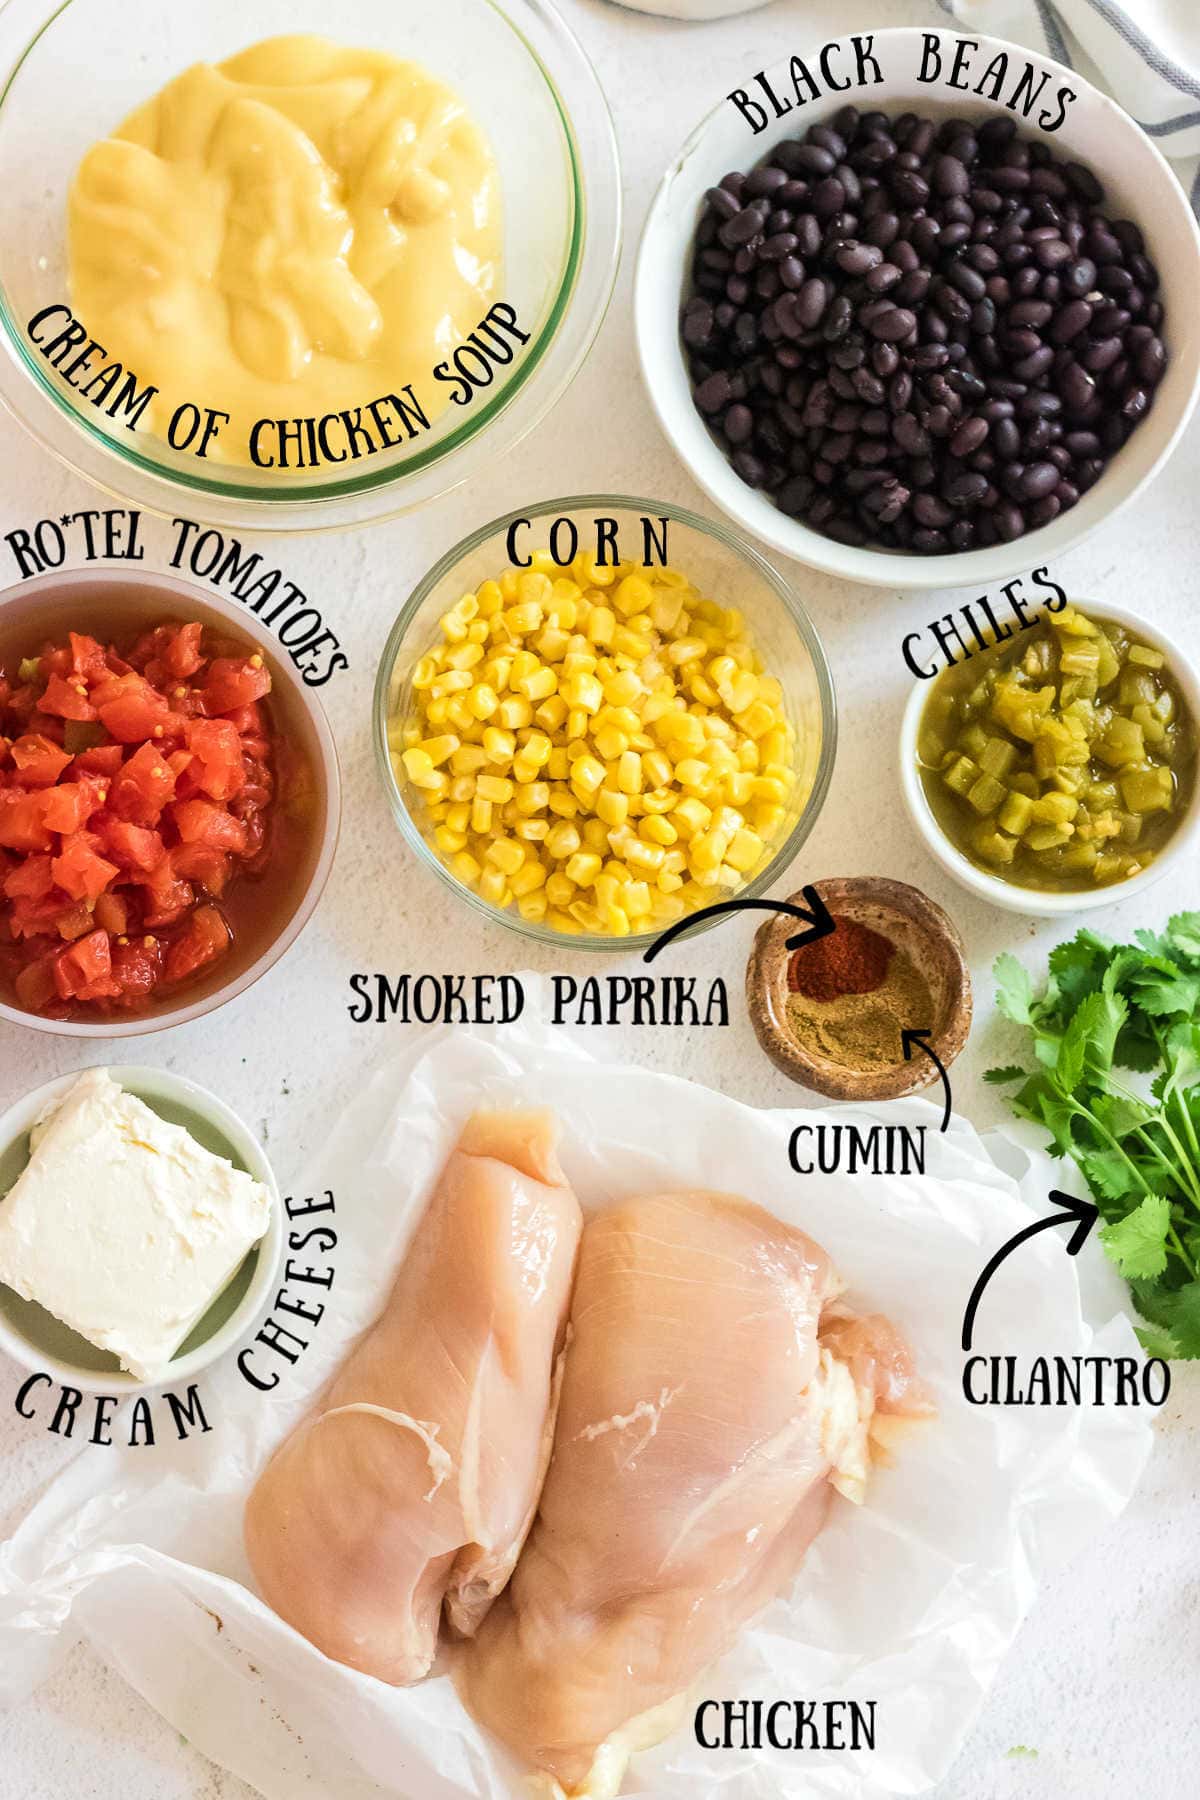 Labeled ingredients for fiesta chicken recipe